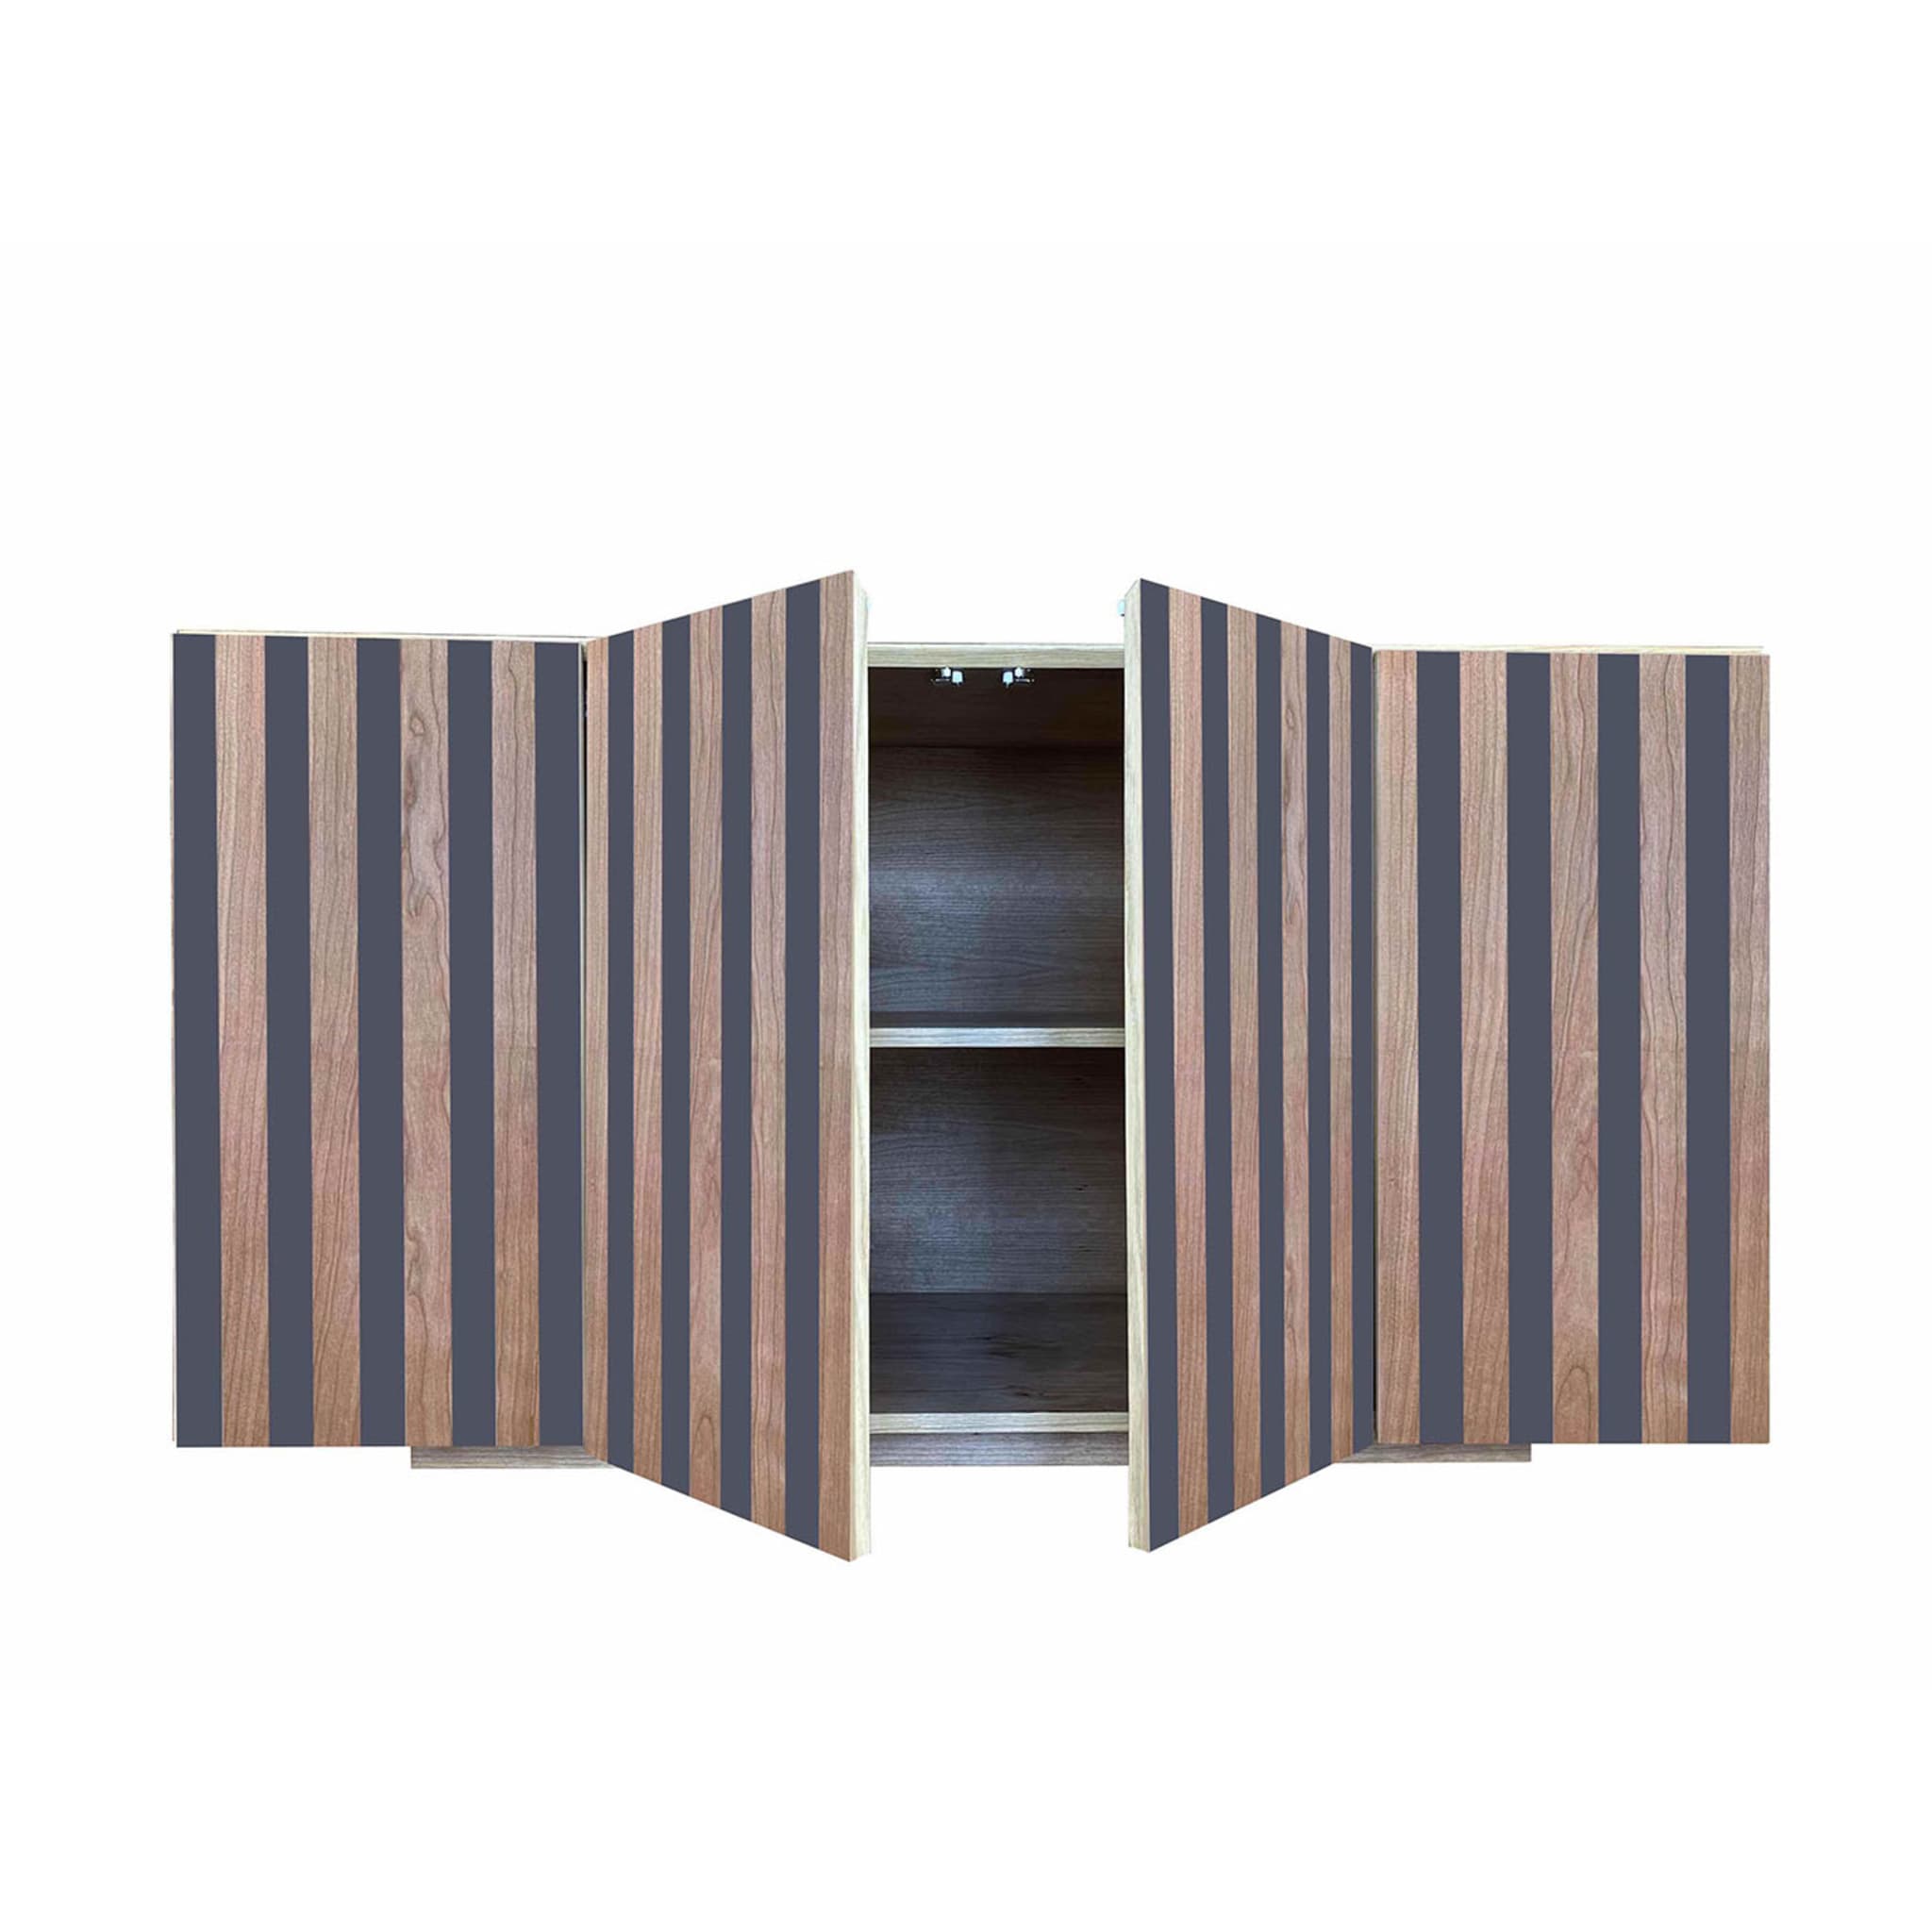 Md5 4-Door Striped Sideboard by Meccani Studio - Alternative view 4